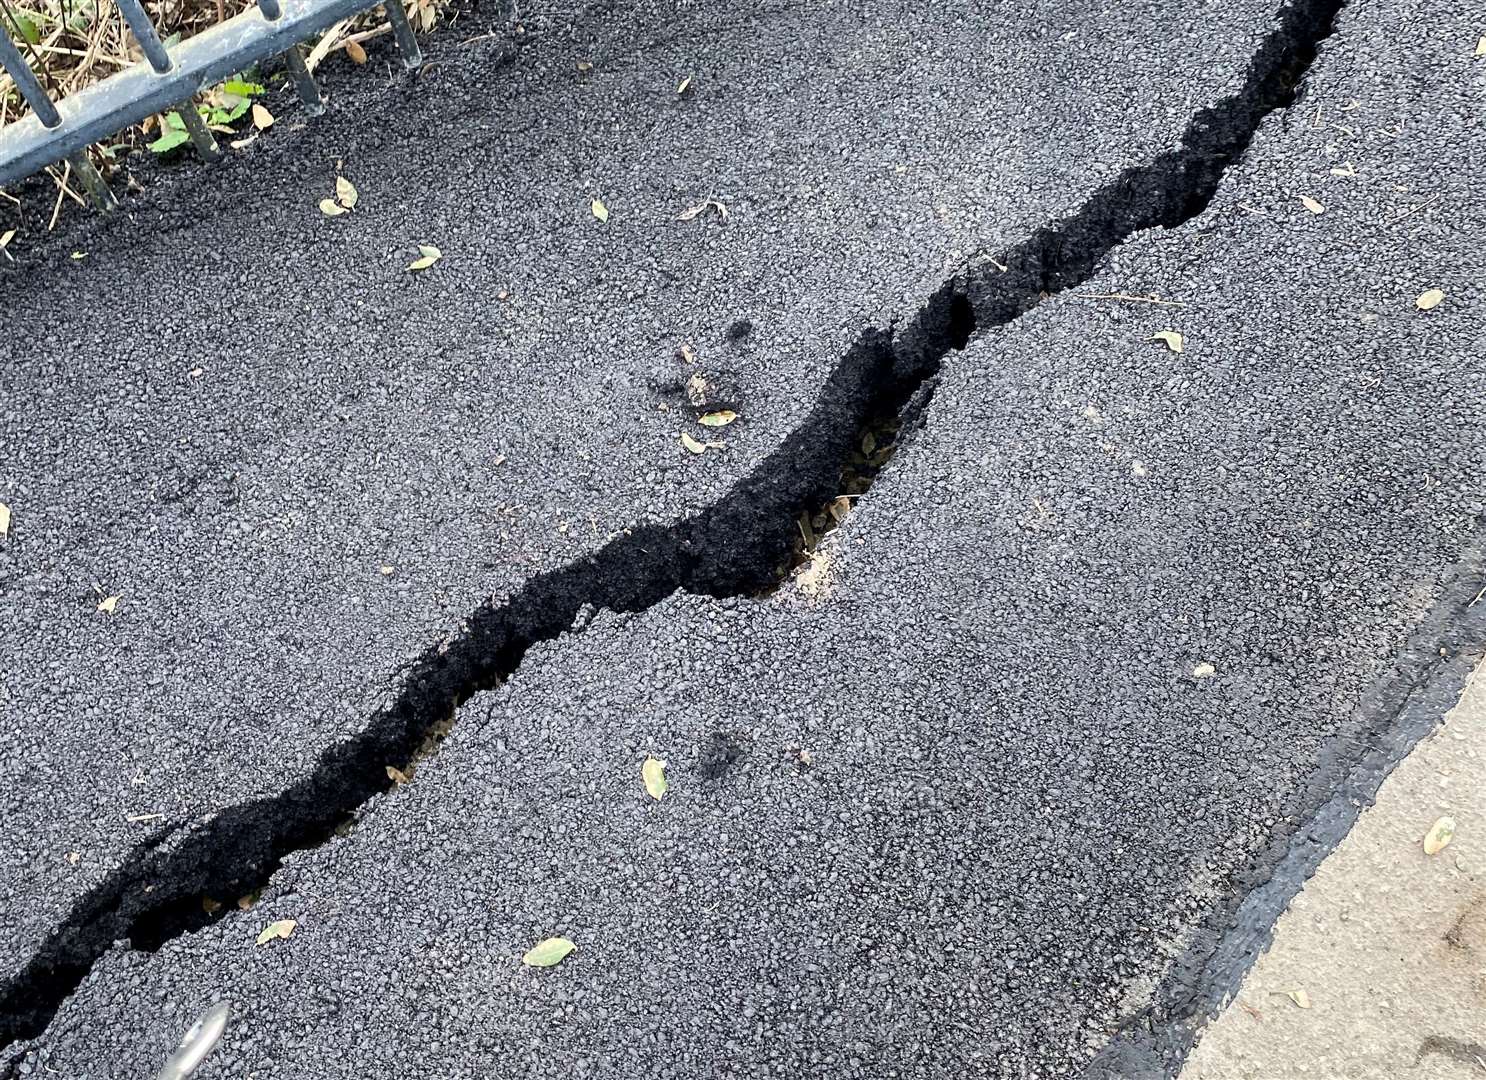 Deep cracks appeared on the recently repaired section of Maderia Walk by the Vinery, soon after repairs were carried out. Picture credit: Stephen West